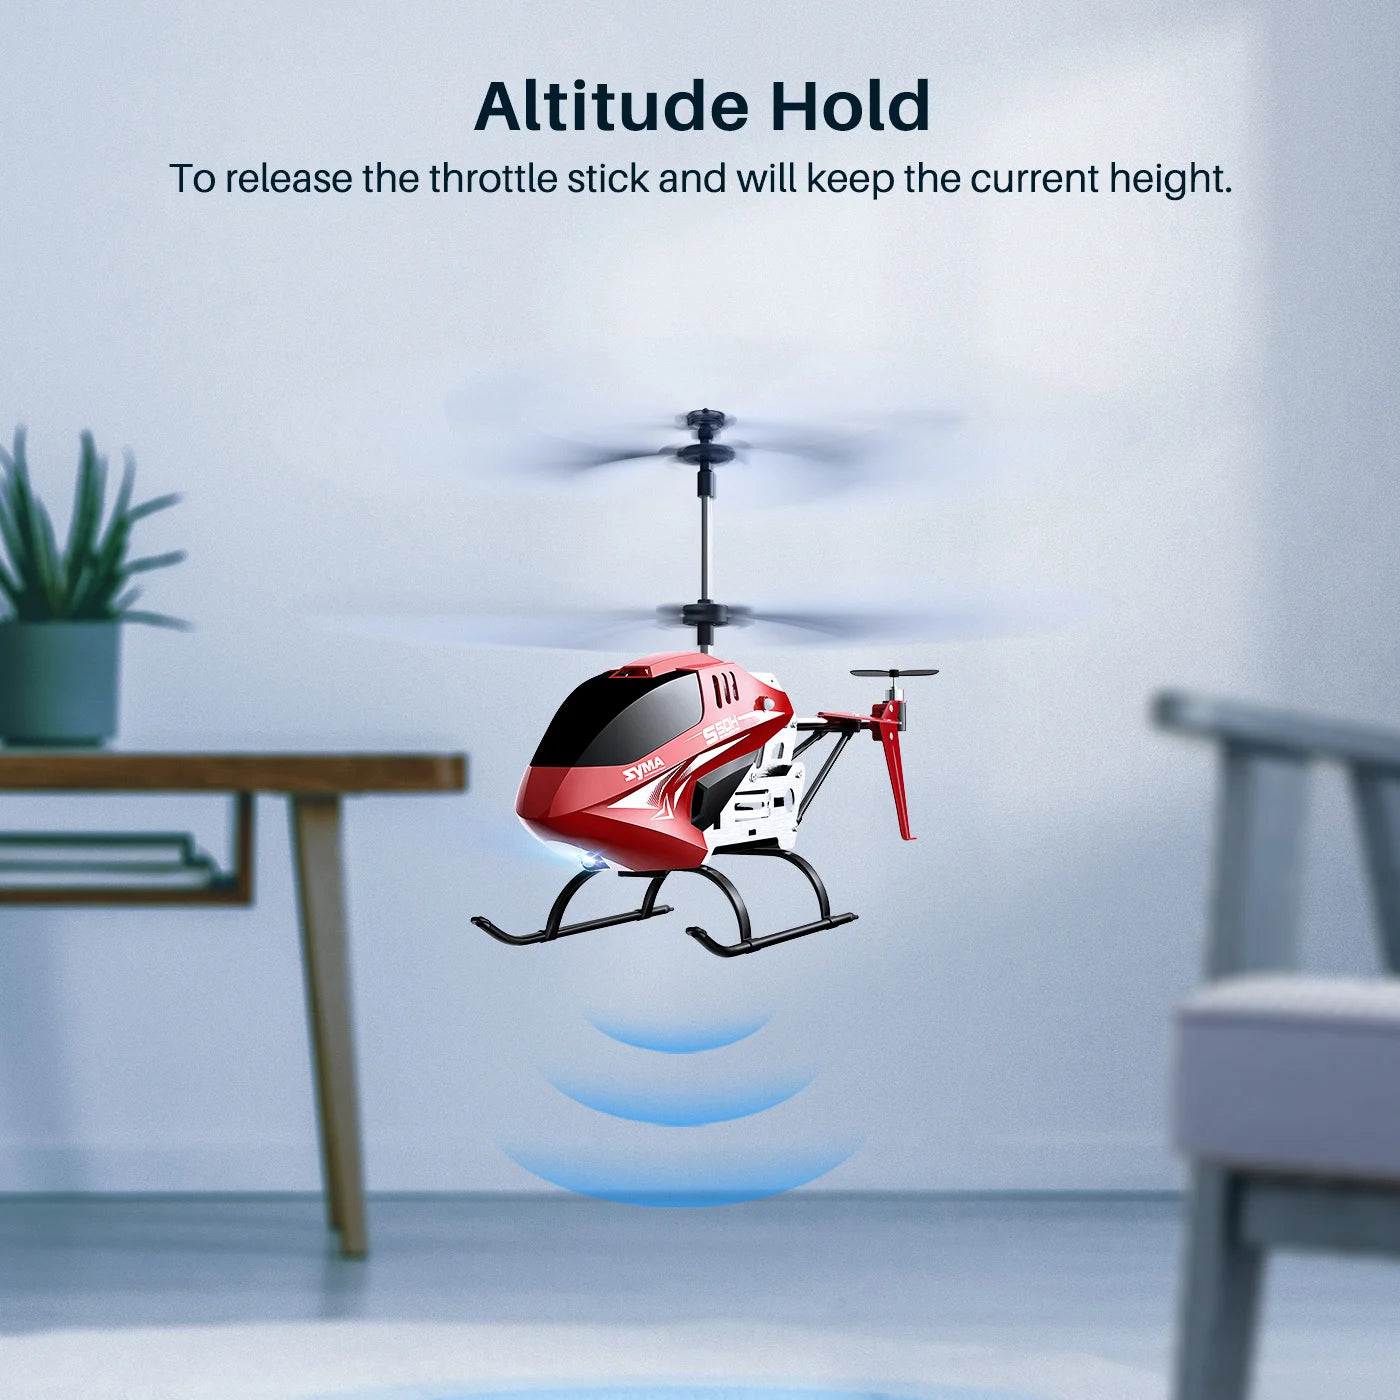 SYMA S50H RC Helicopter, Altitude Hold To release the throttle stick and will keep the current height: 5e44 J